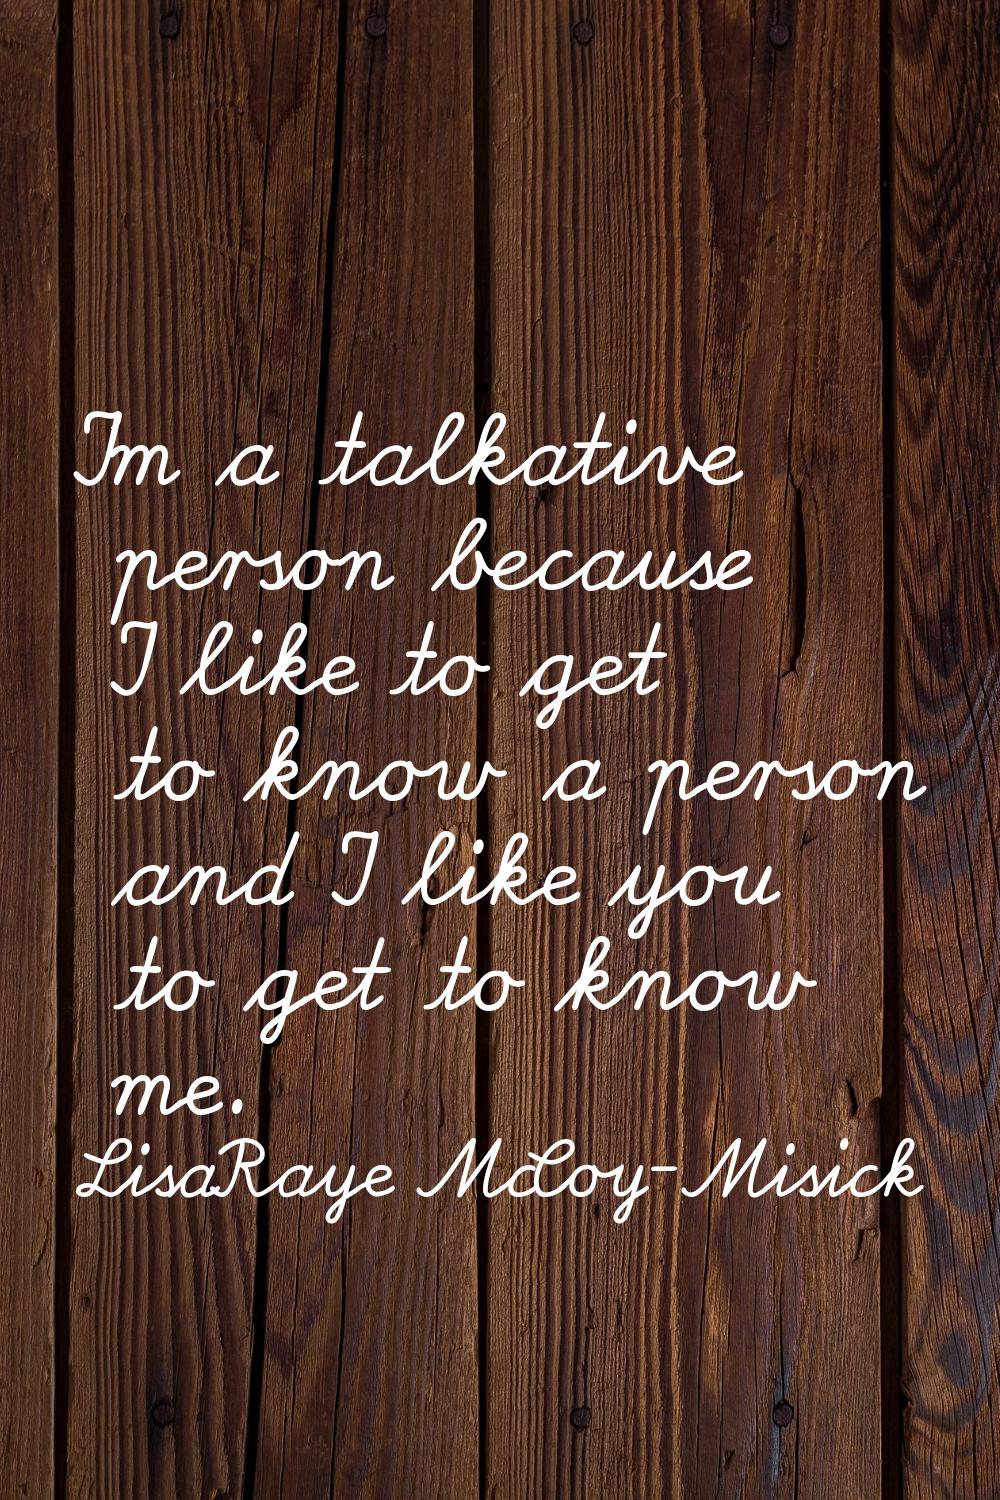 I'm a talkative person because I like to get to know a person and I like you to get to know me.